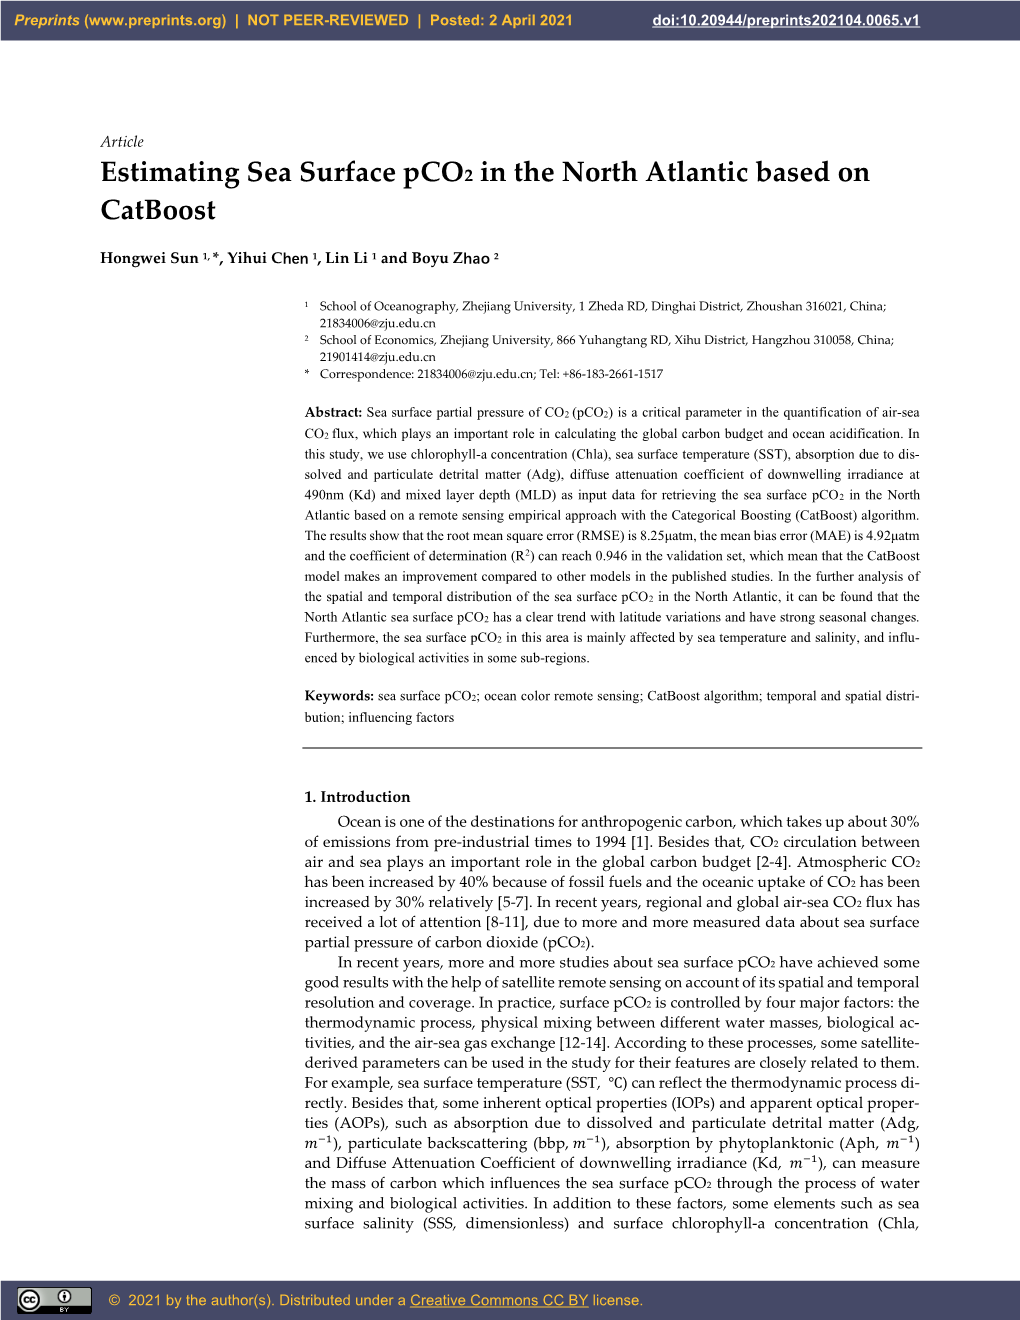 Estimating Sea Surface Pco2 in the North Atlantic Based on Catboost